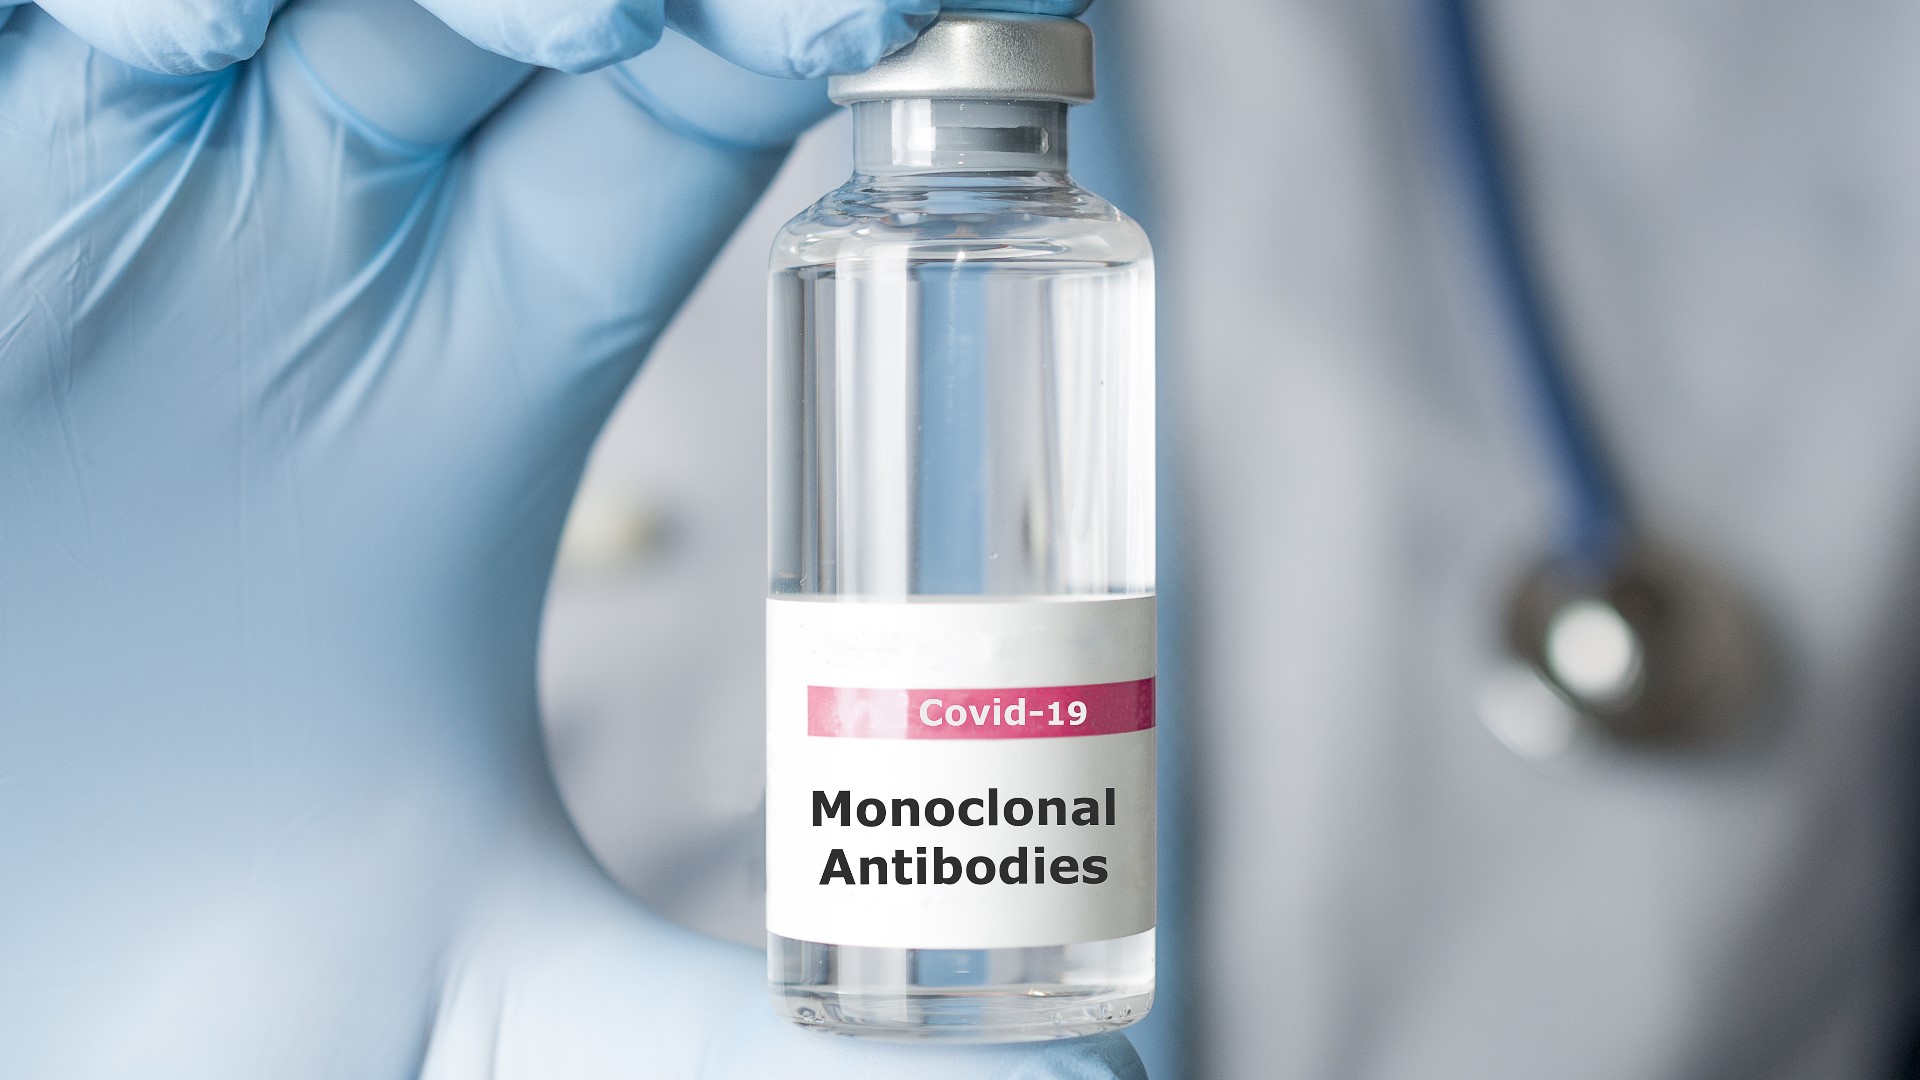 The FDA has given monoclonal antibody treatment emergency use authorization. The antibodies work by attaching to the virus and preventing it from infecting cells.